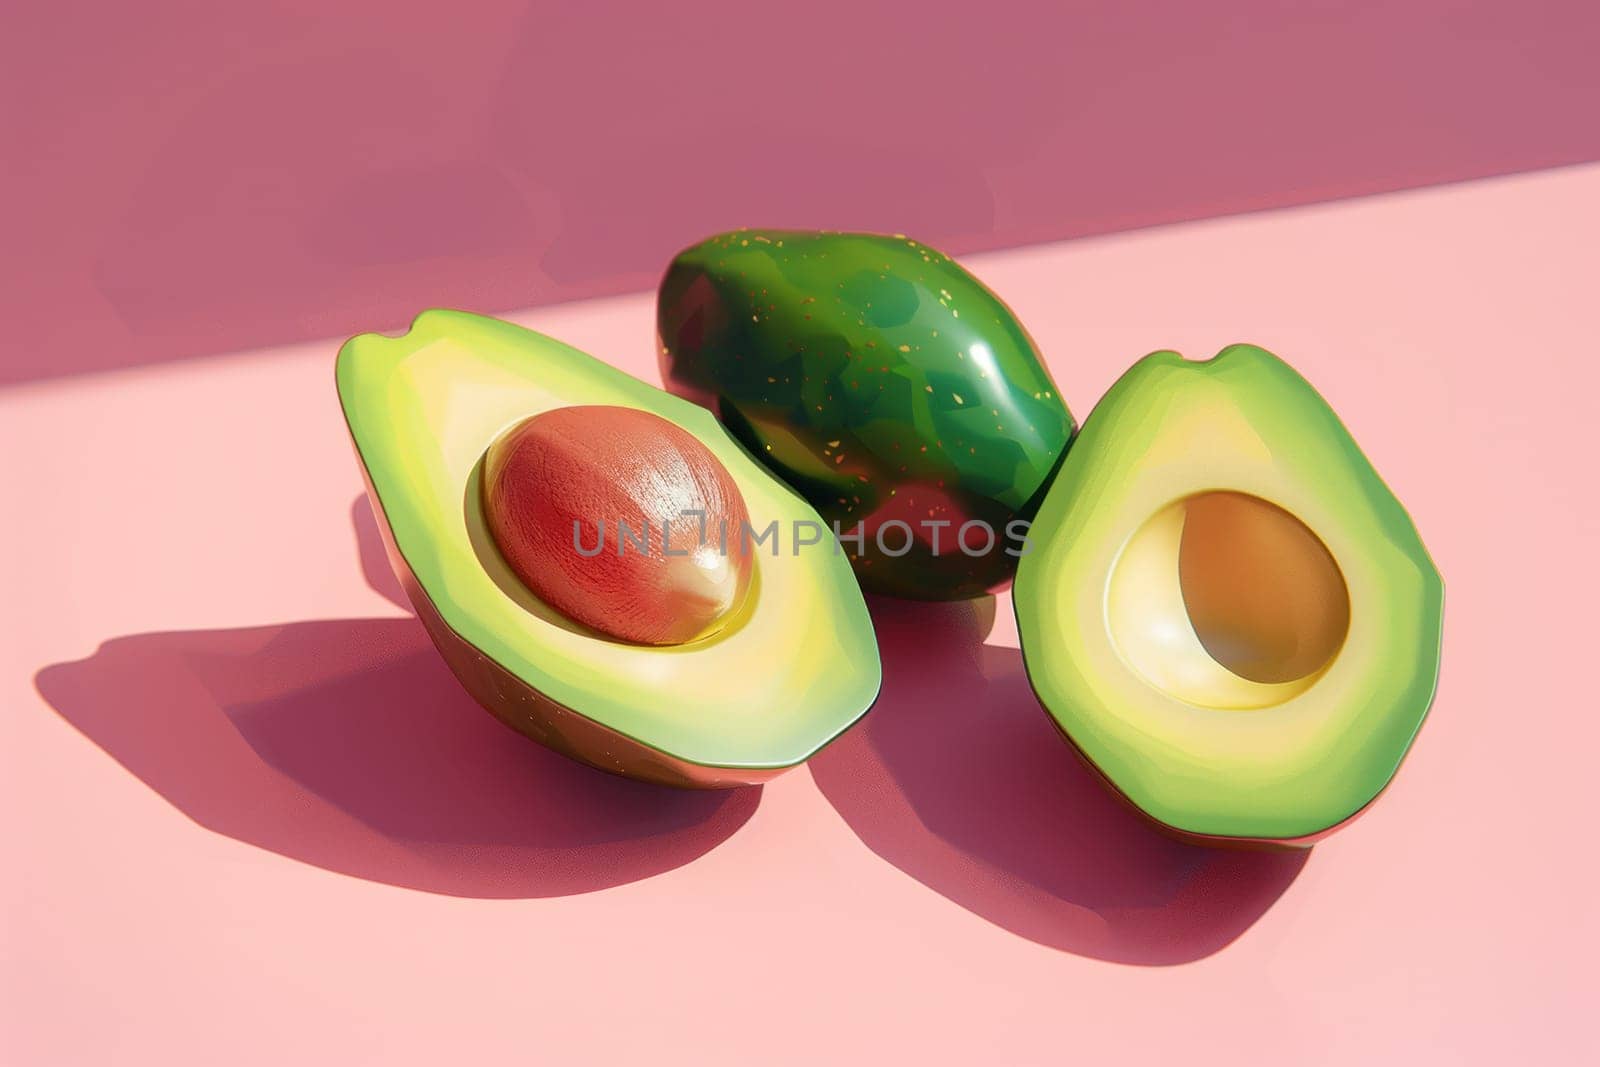 Two fresh avocados on pink surface with red spot, healthy food and beauty concept